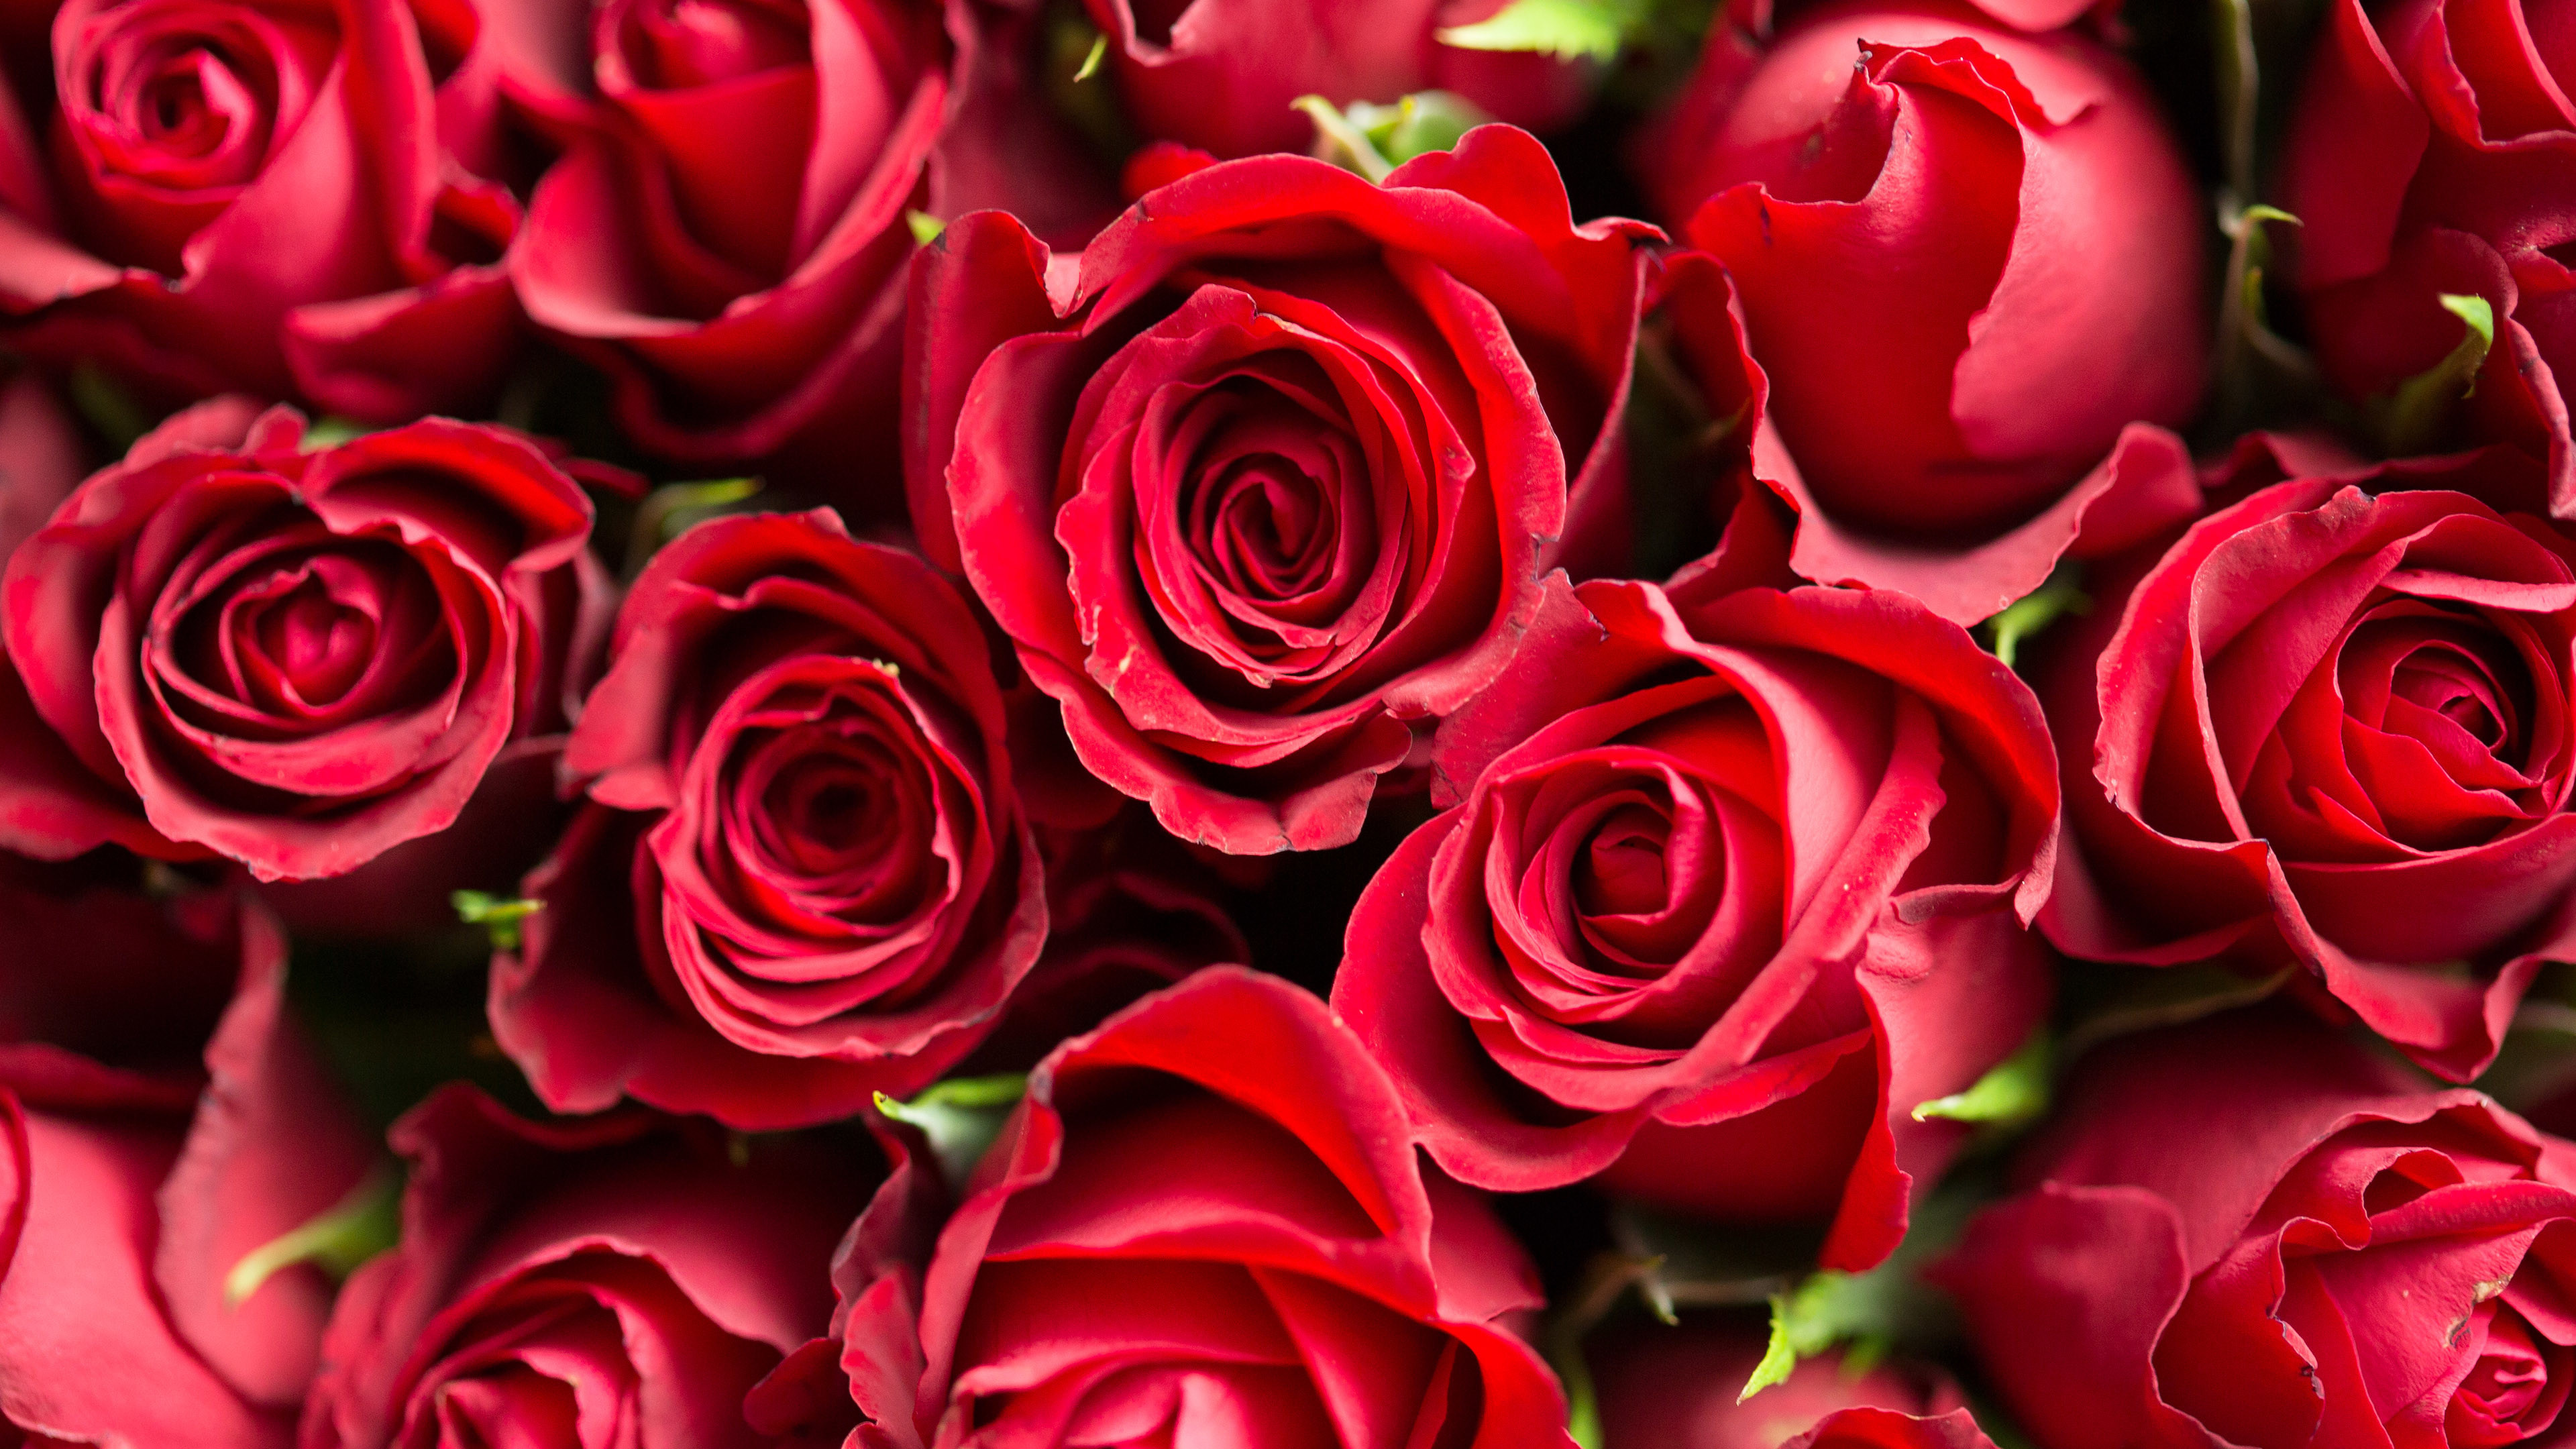 3840x2160 4K Background with Pictures of Red Roses Flower